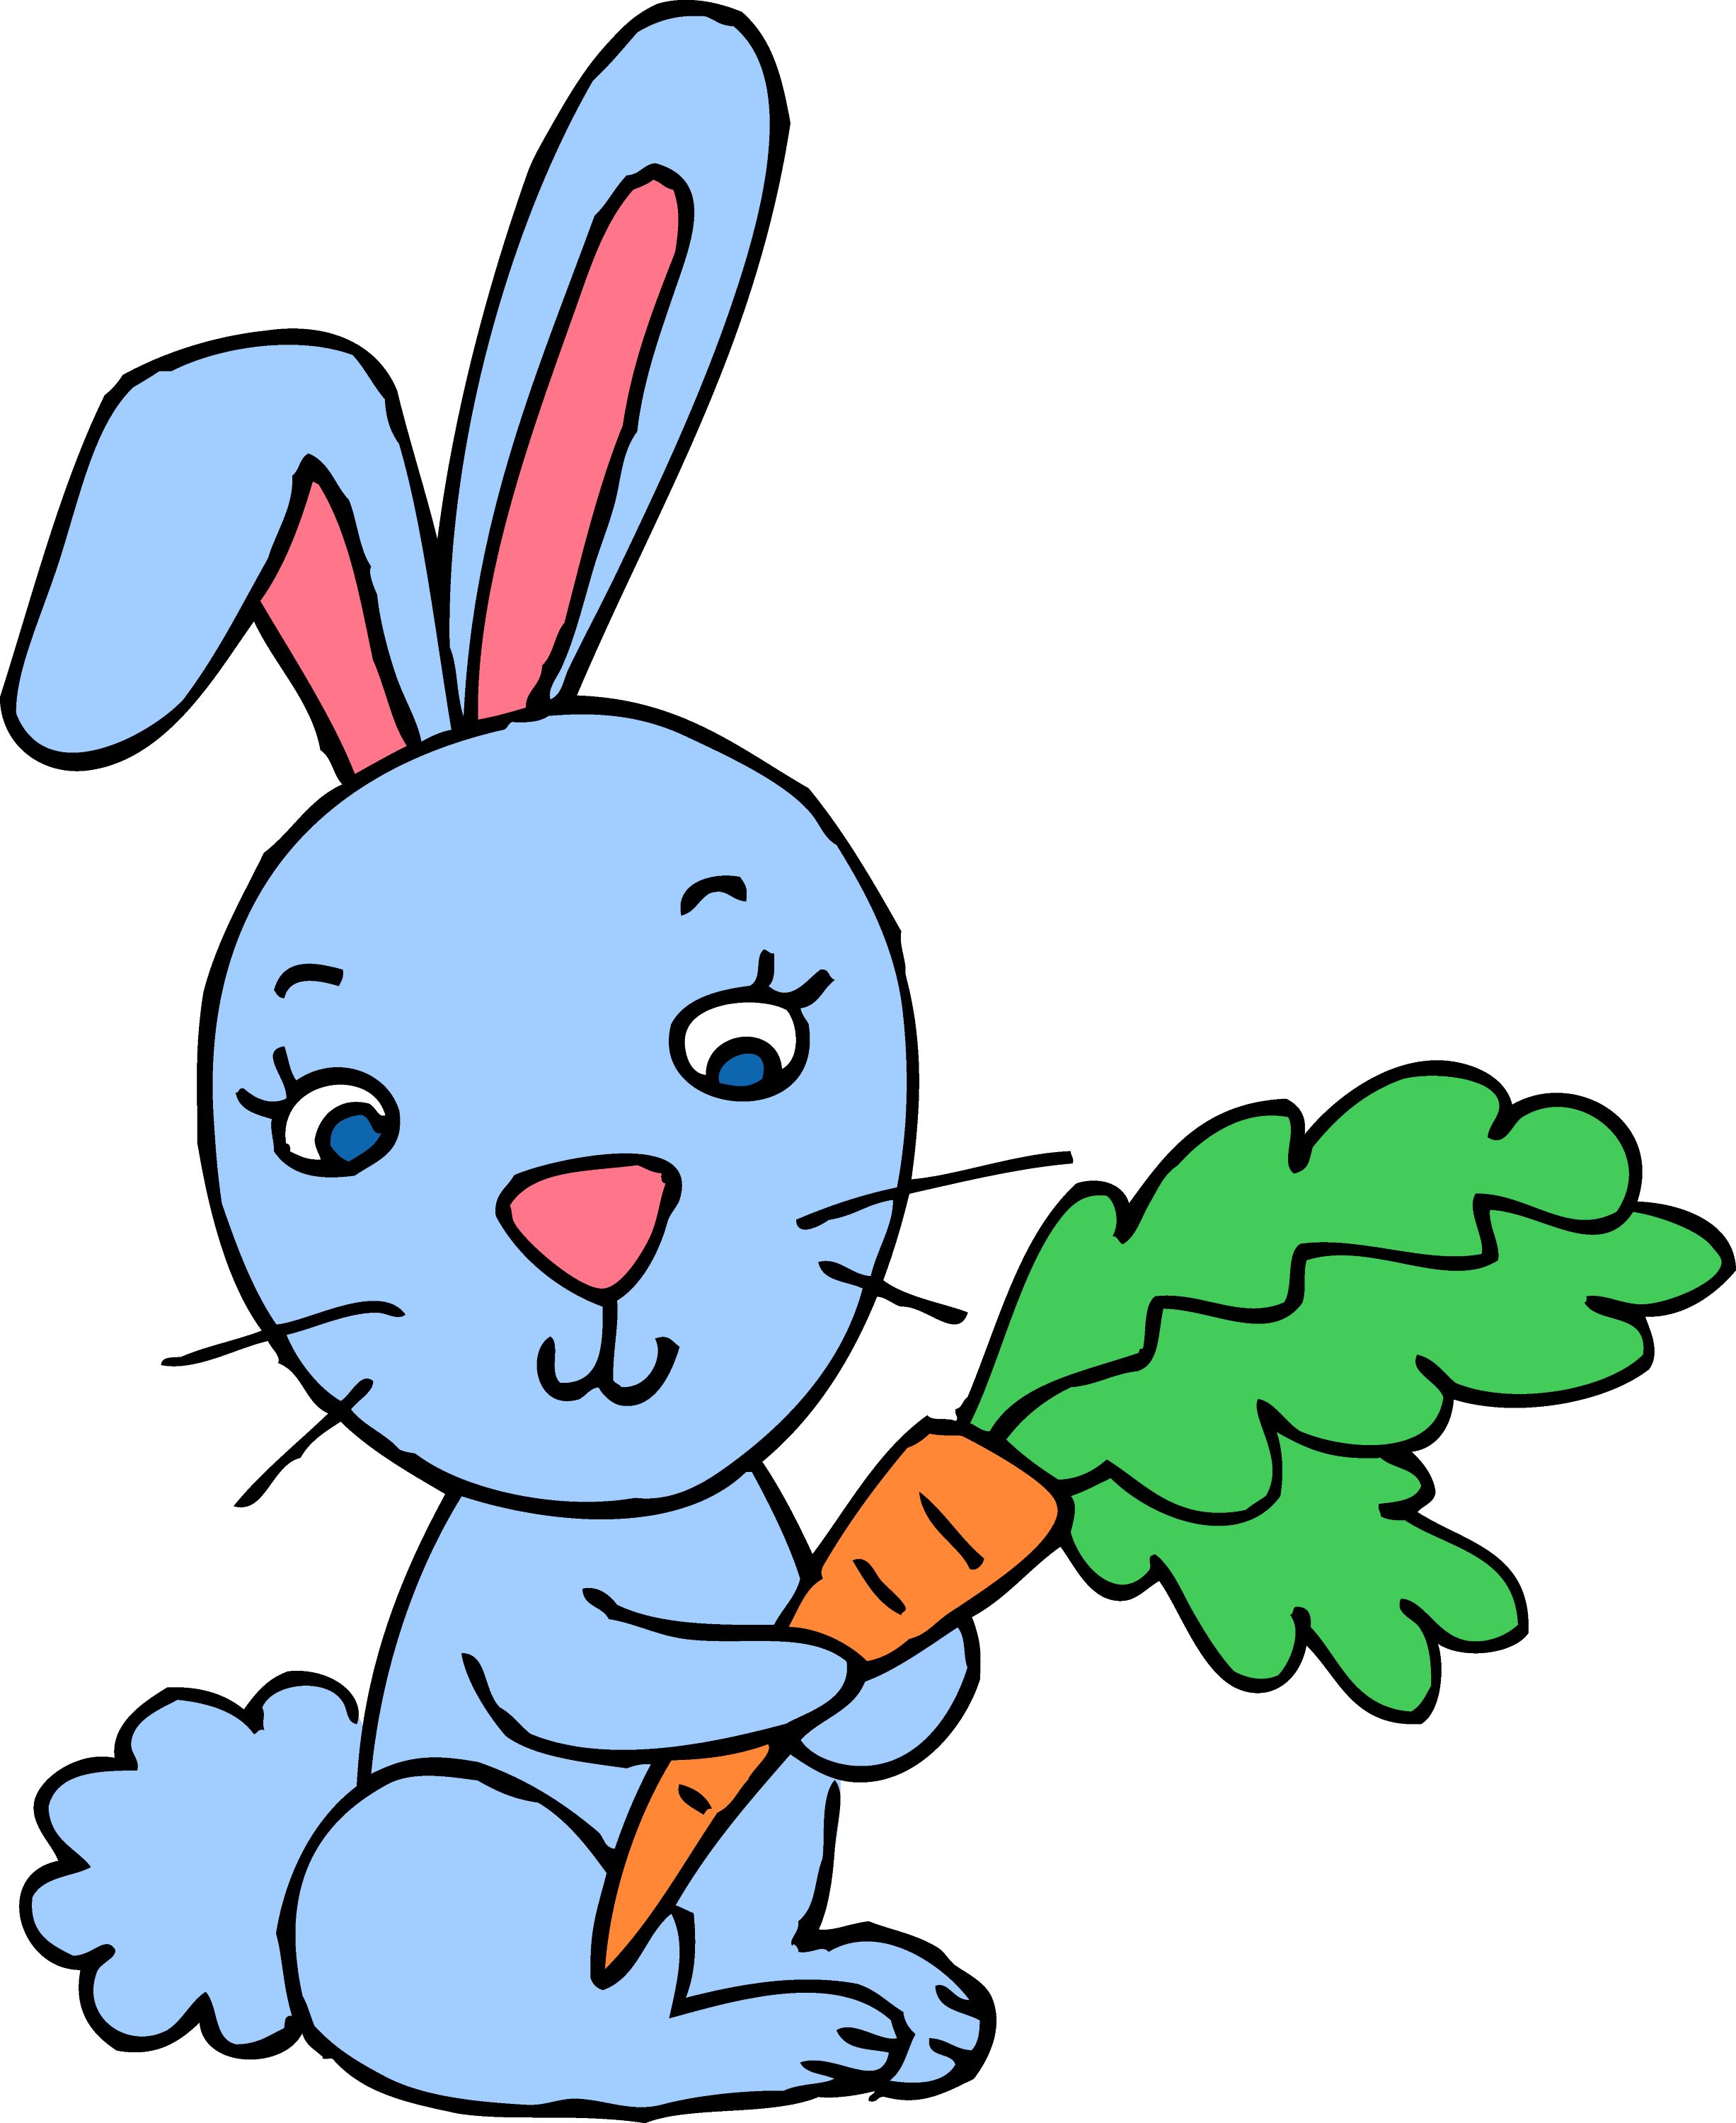 free clipart images easter bunny - photo #29